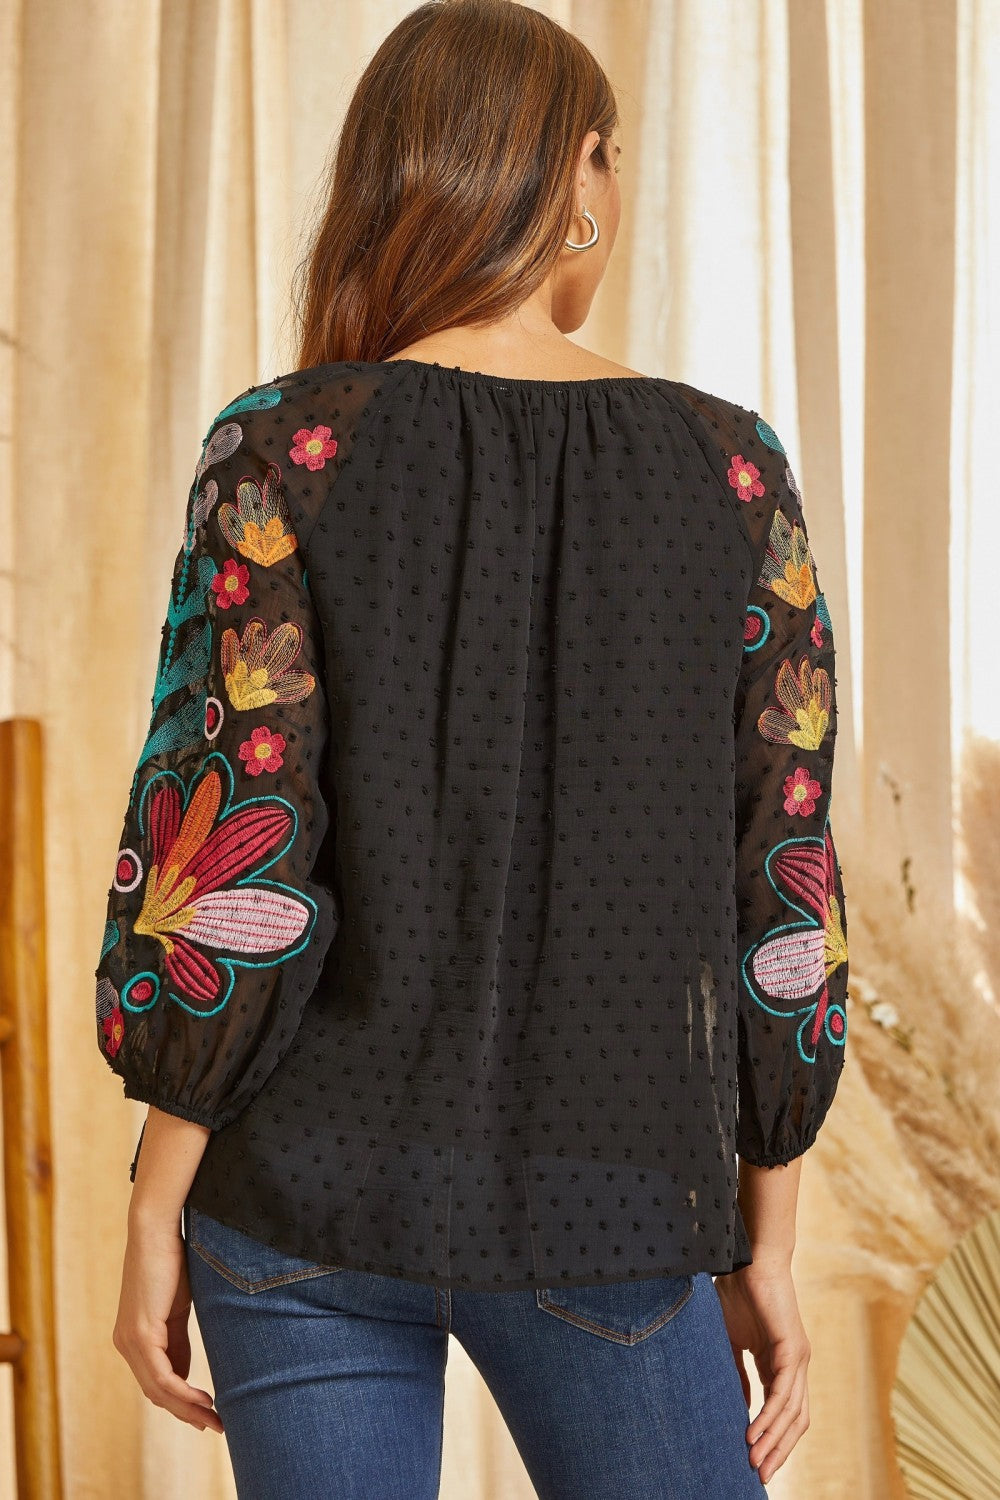 Heart Throb Embroidered Sleeve Top Regular and Plus